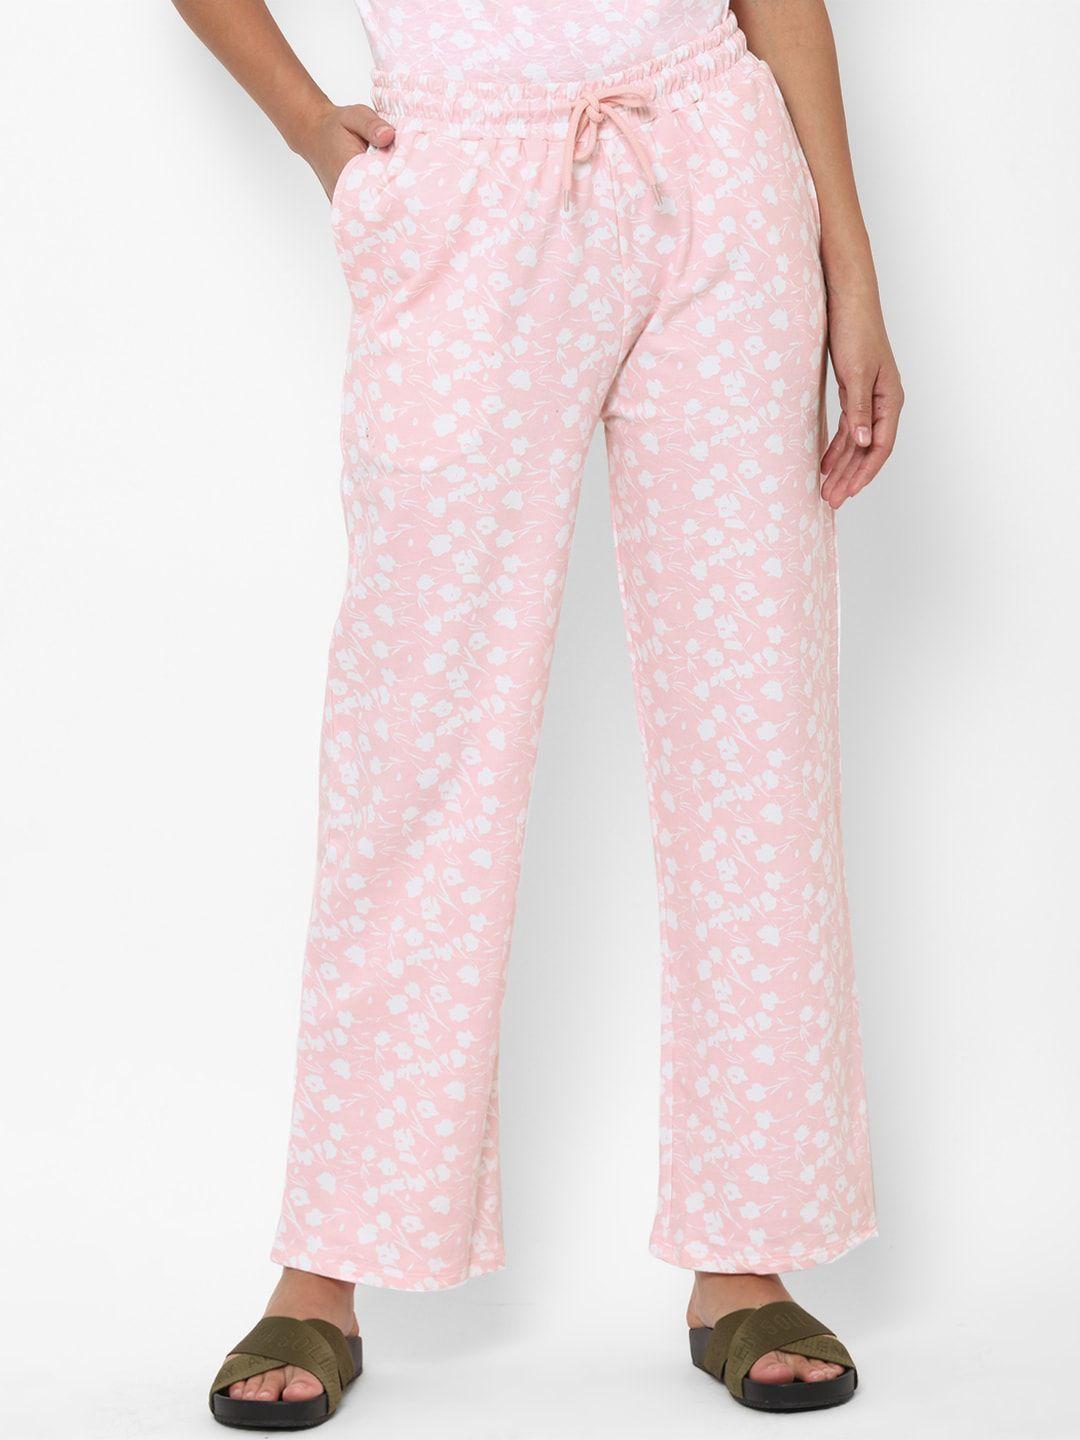 allen-solly-woman-women-pink-floral-printed-100%-cotton-parallel-trousers